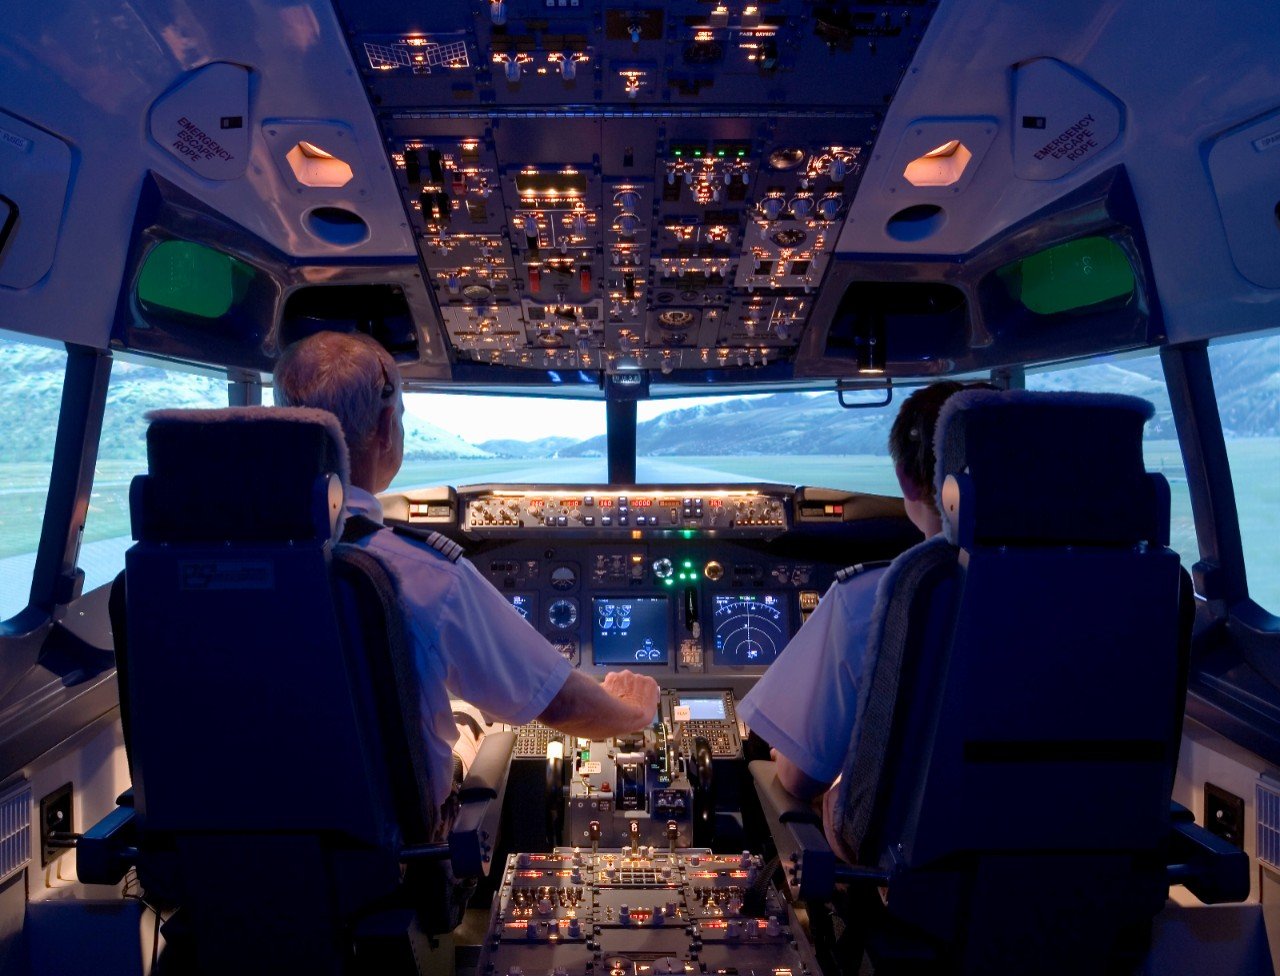 Two pilots sat in a commercial airliner cockpit at the base of a runway.